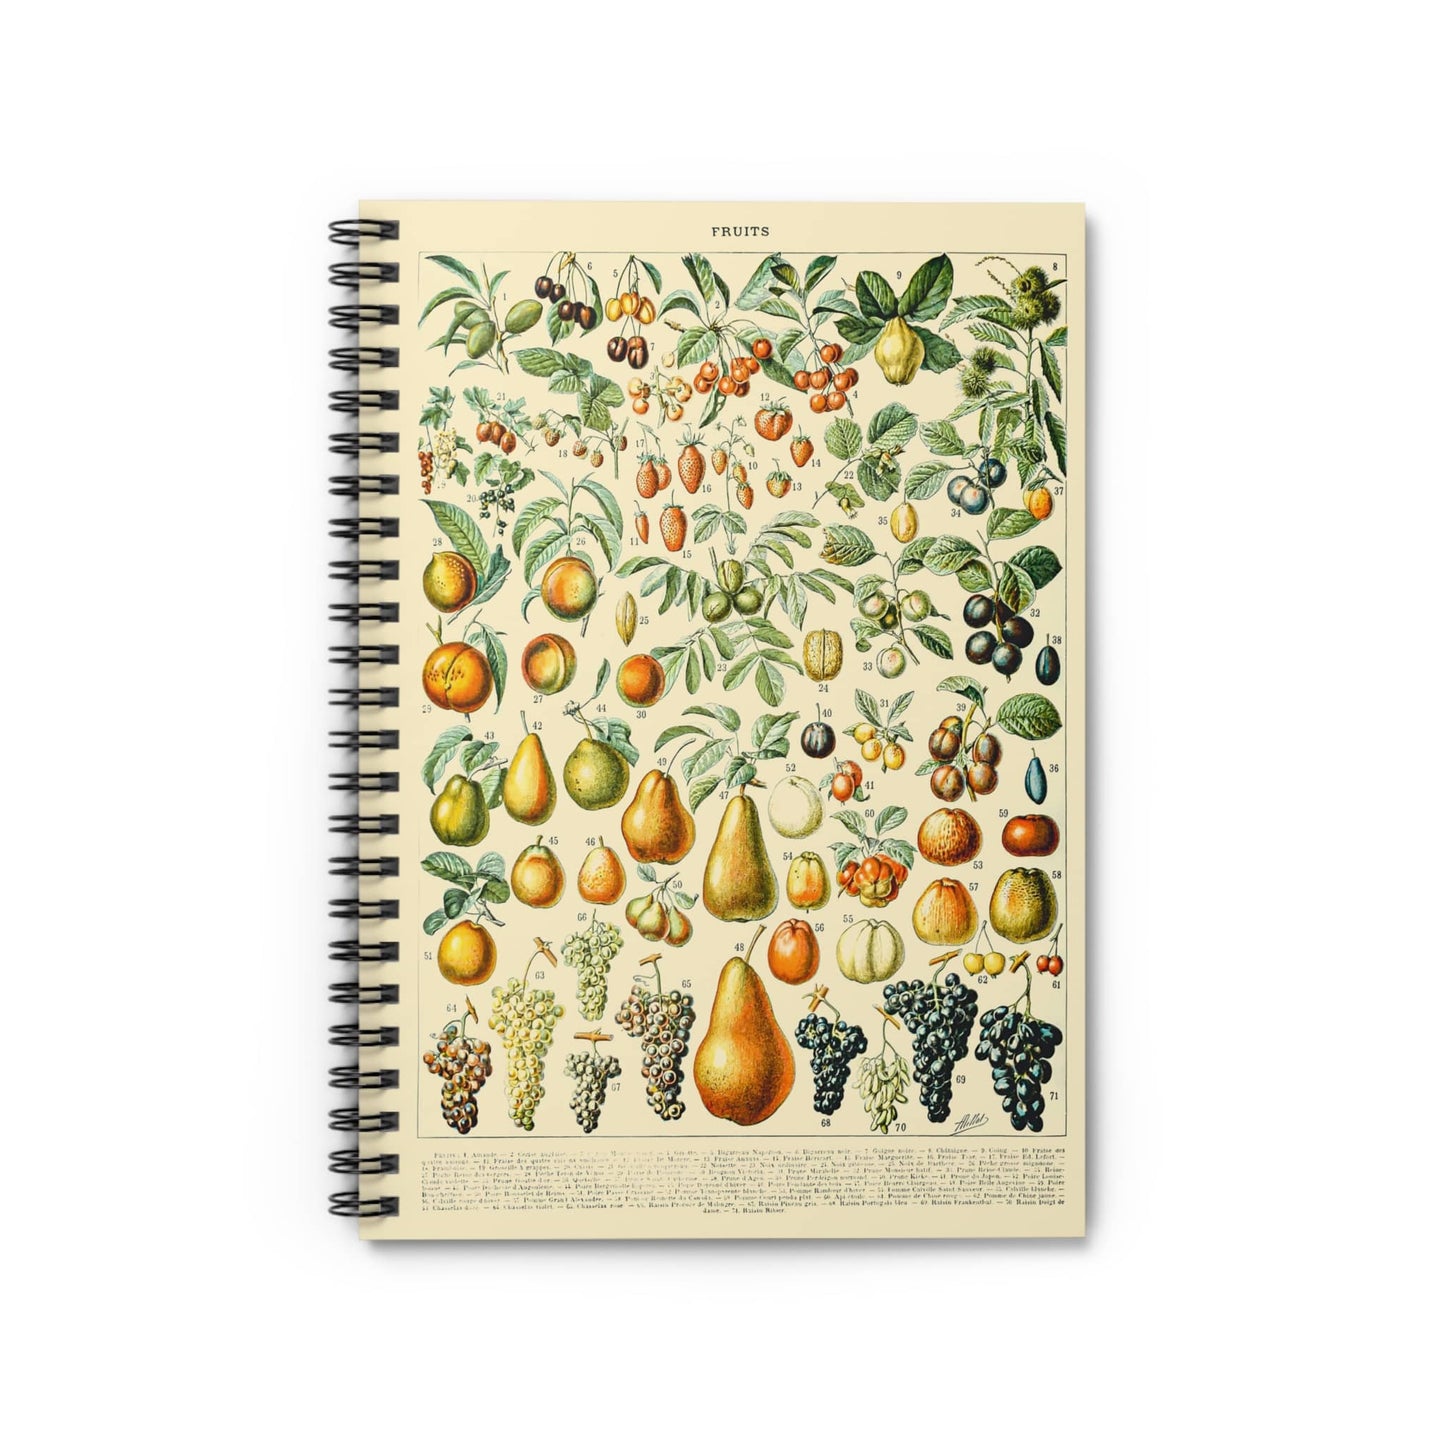 All Sorts of Fruits Notebook with Fruits Chart cover, perfect for journaling and planning, featuring various fruit charts.